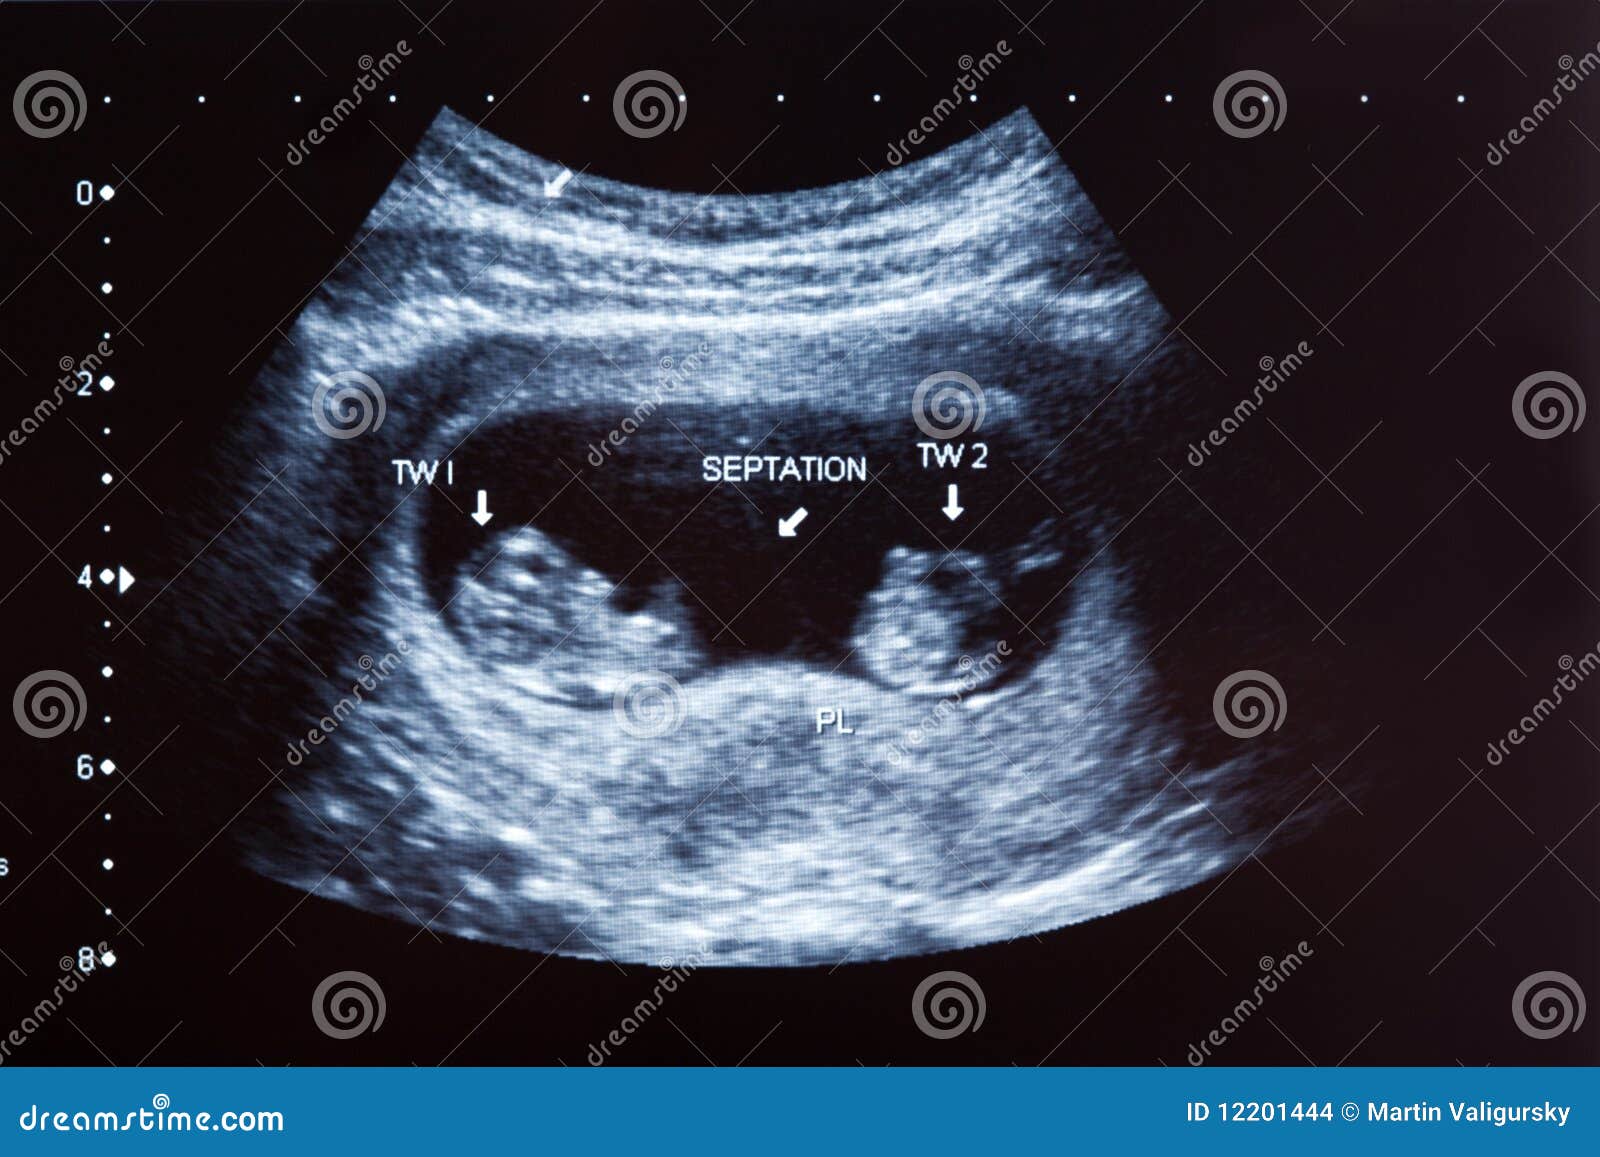 Ultrasound Scan Of 10 Weeks Old Twins Stock Photo - Image ...